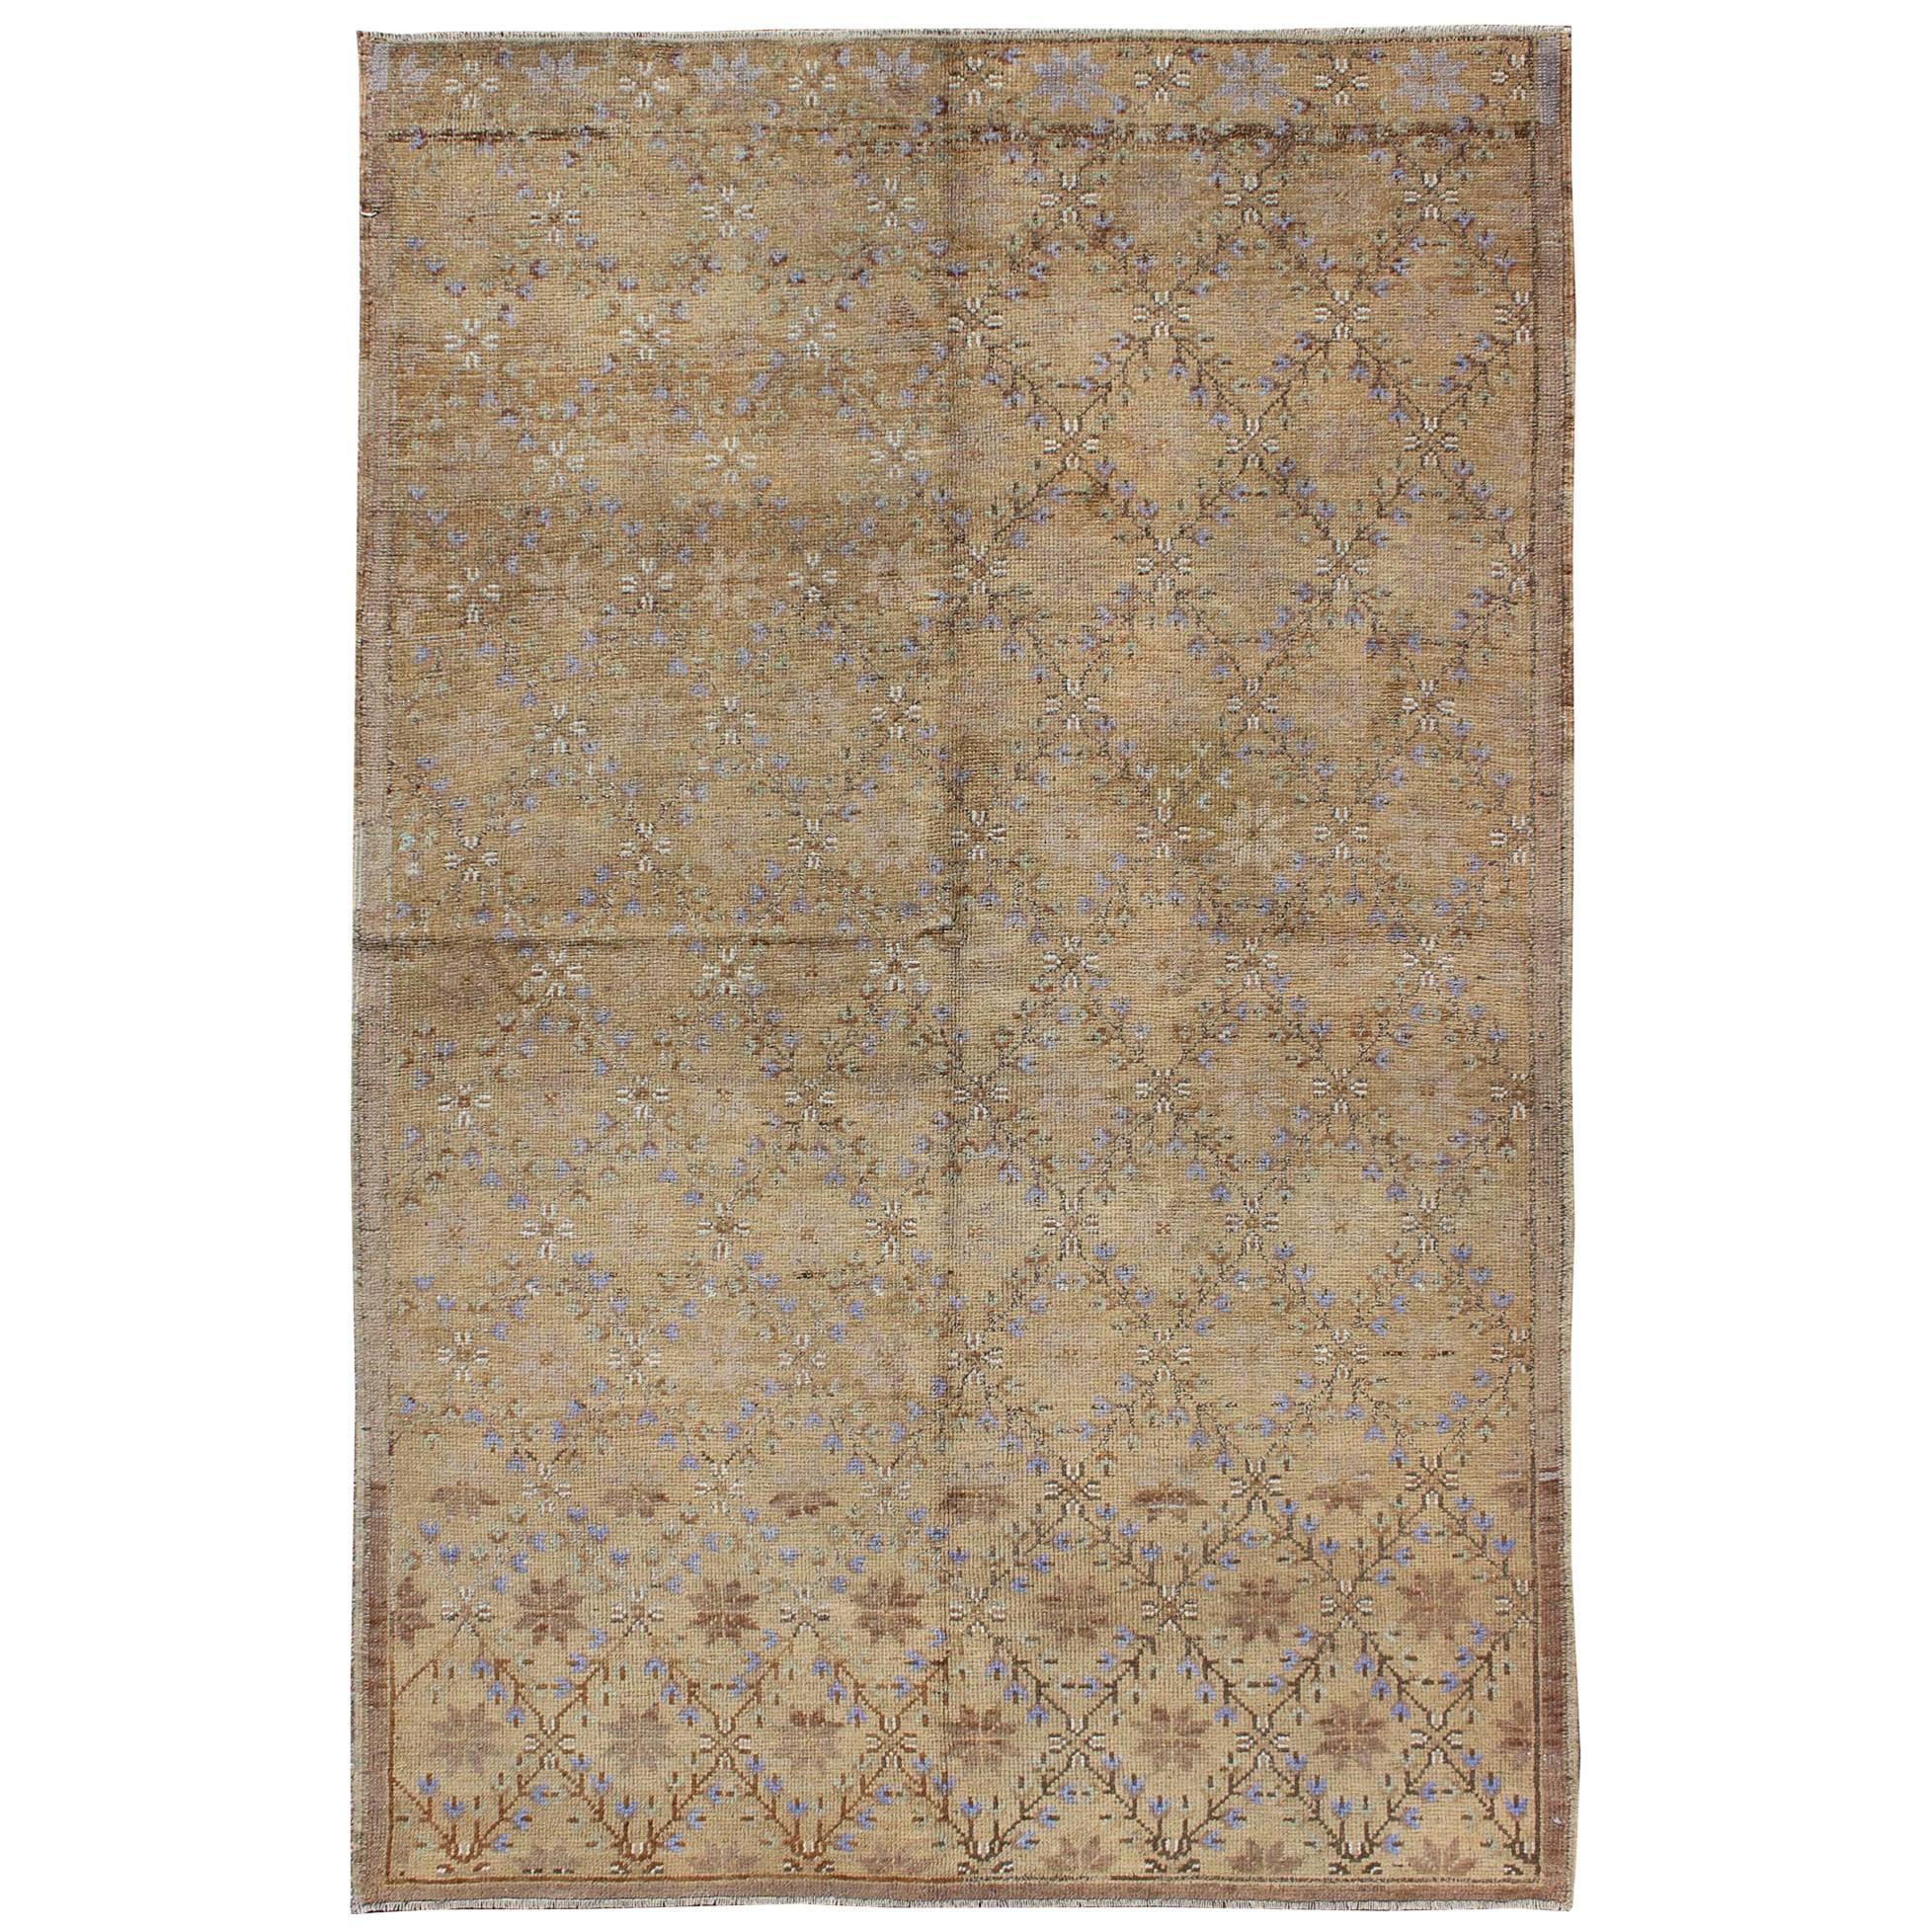 Turkish Oushak Rug with All-Over Design and Neutral Colors; Tan, Taupe, Icy Blue